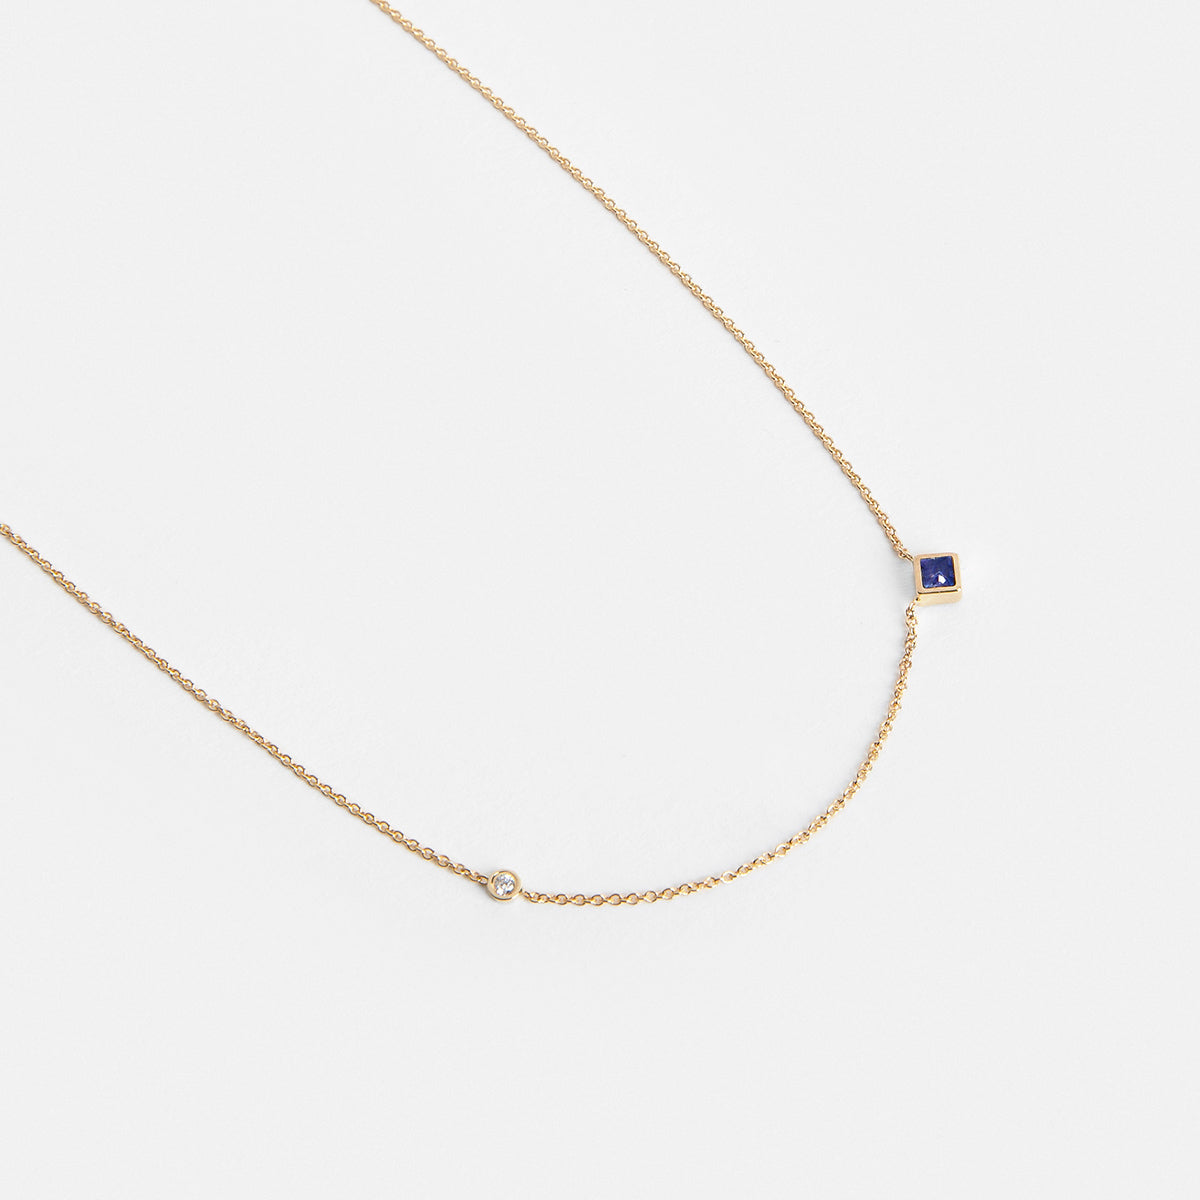 Isu Cool Necklace in 14k Gold set with Sapphire and White Diamond By SHW Fine Jewelry NYC